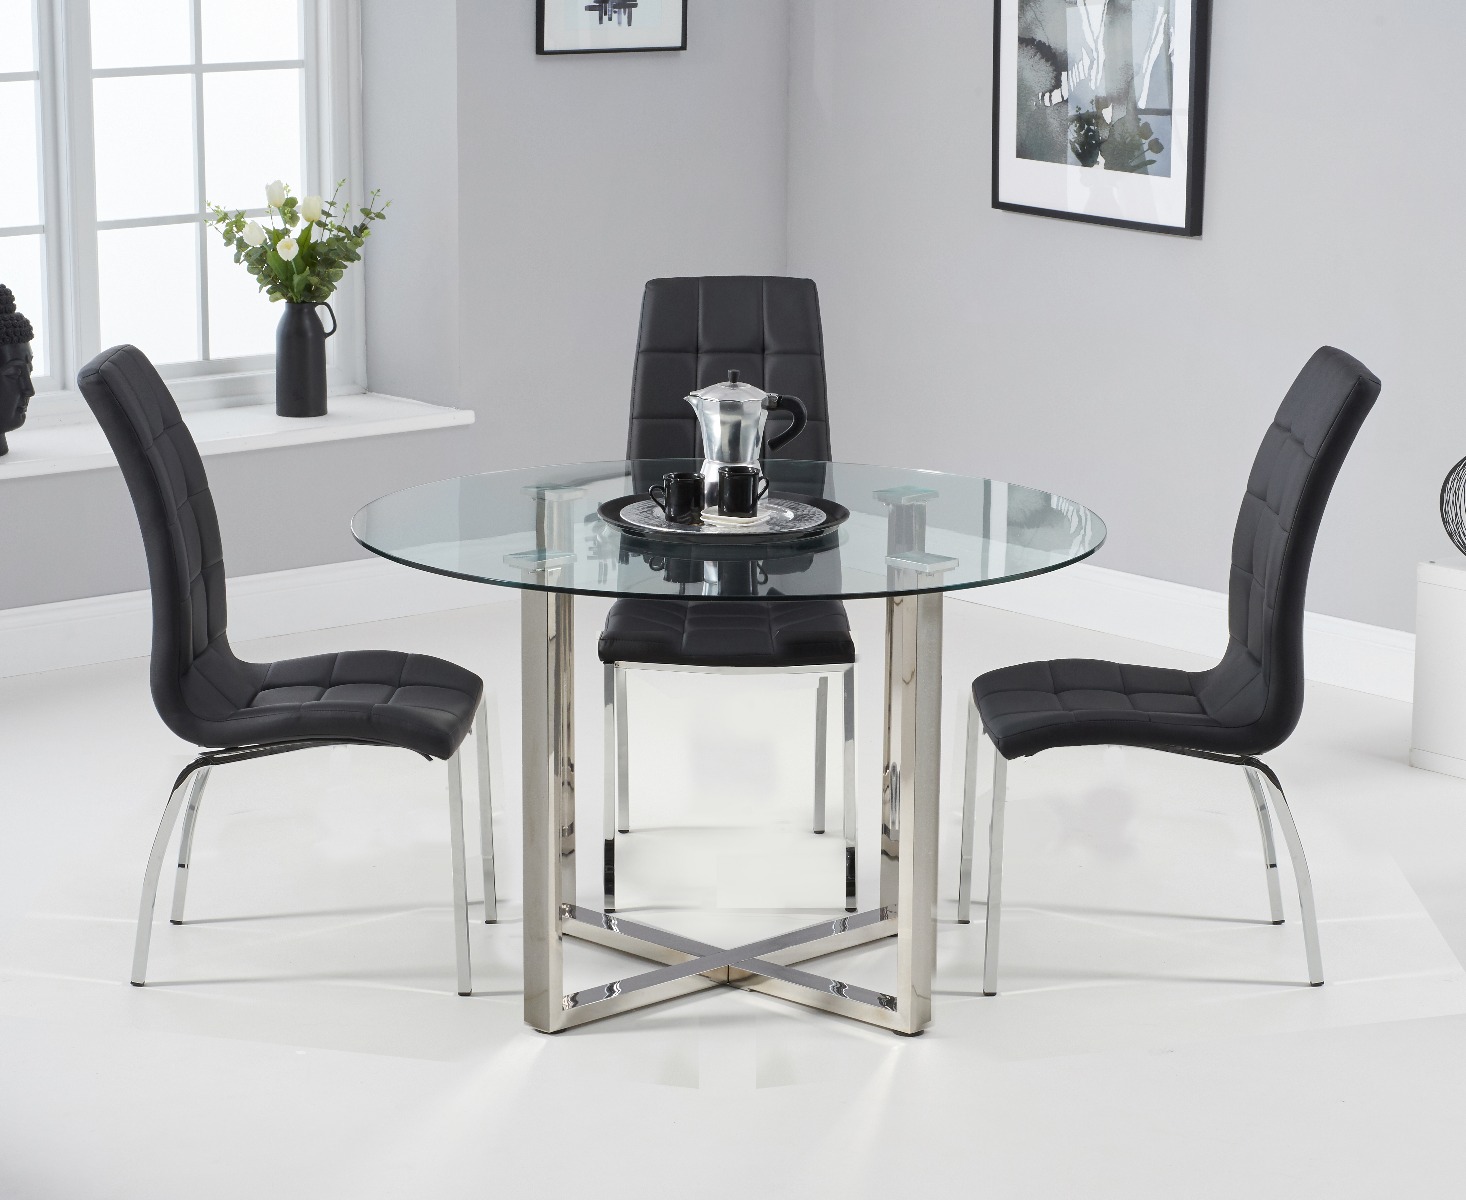 Photo 2 of Vaso 120cm round glass dining table with 4 cream enzo chairs